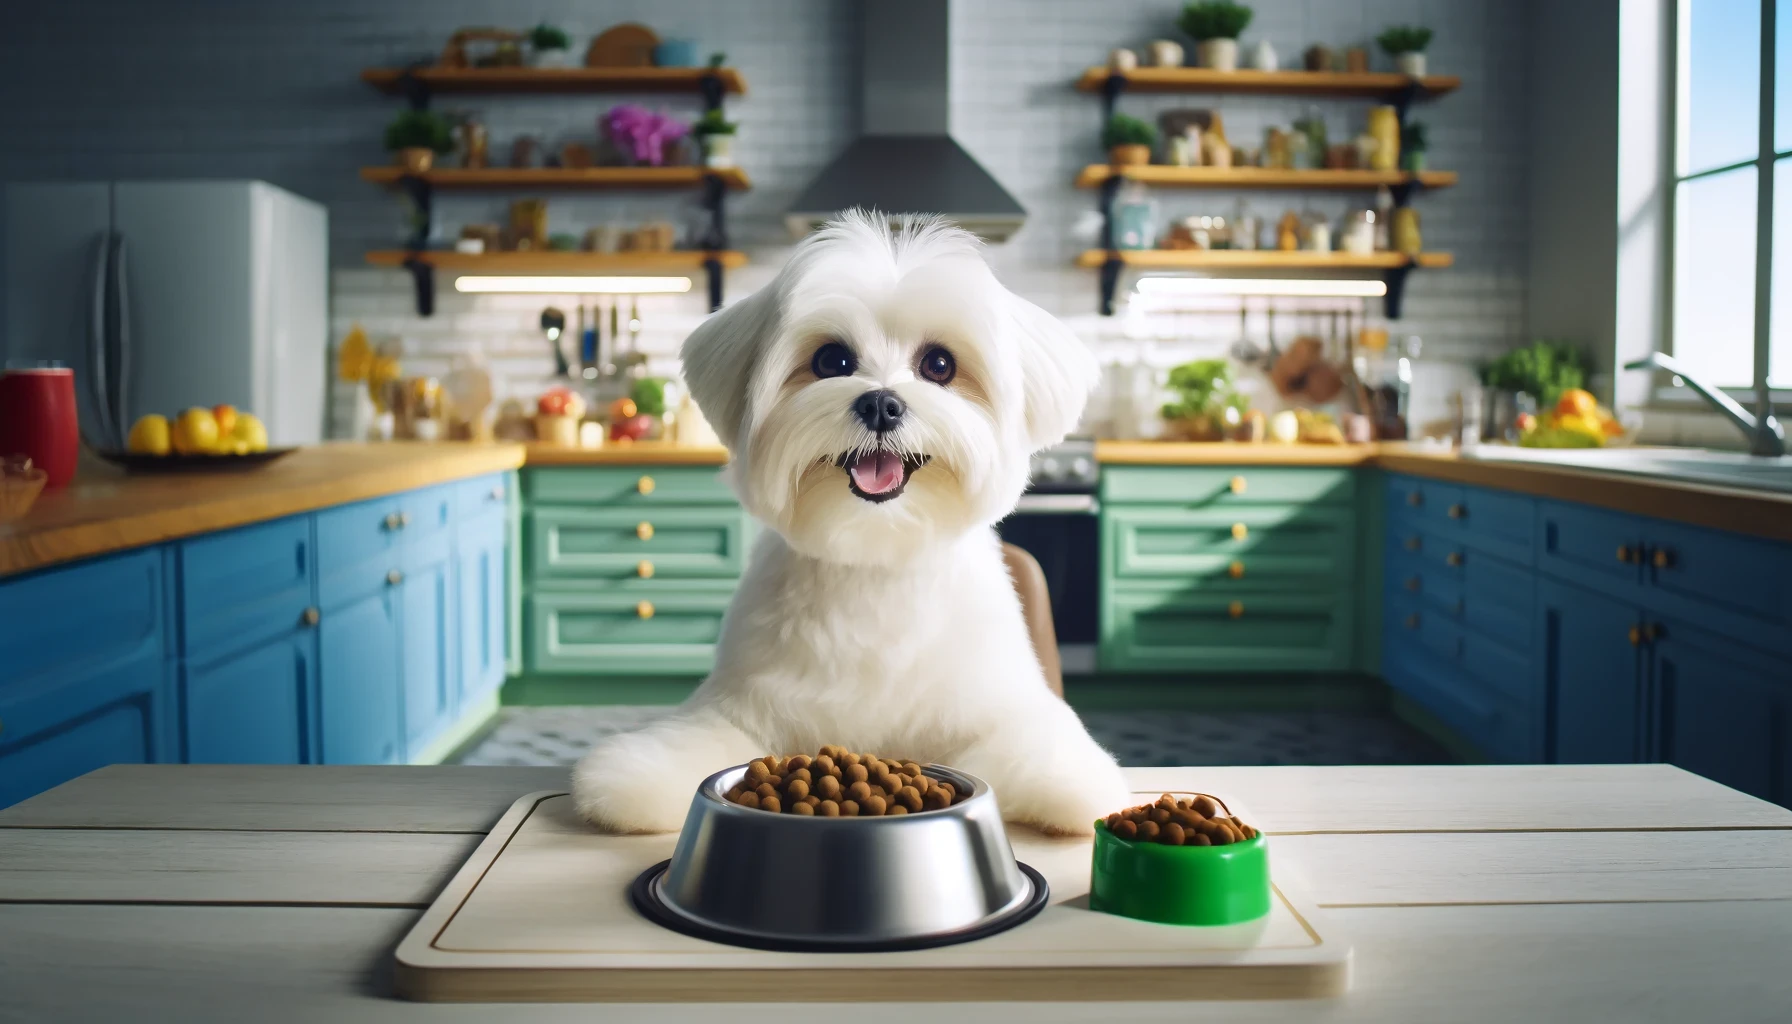 a tv commercial image featuring a maltese dog